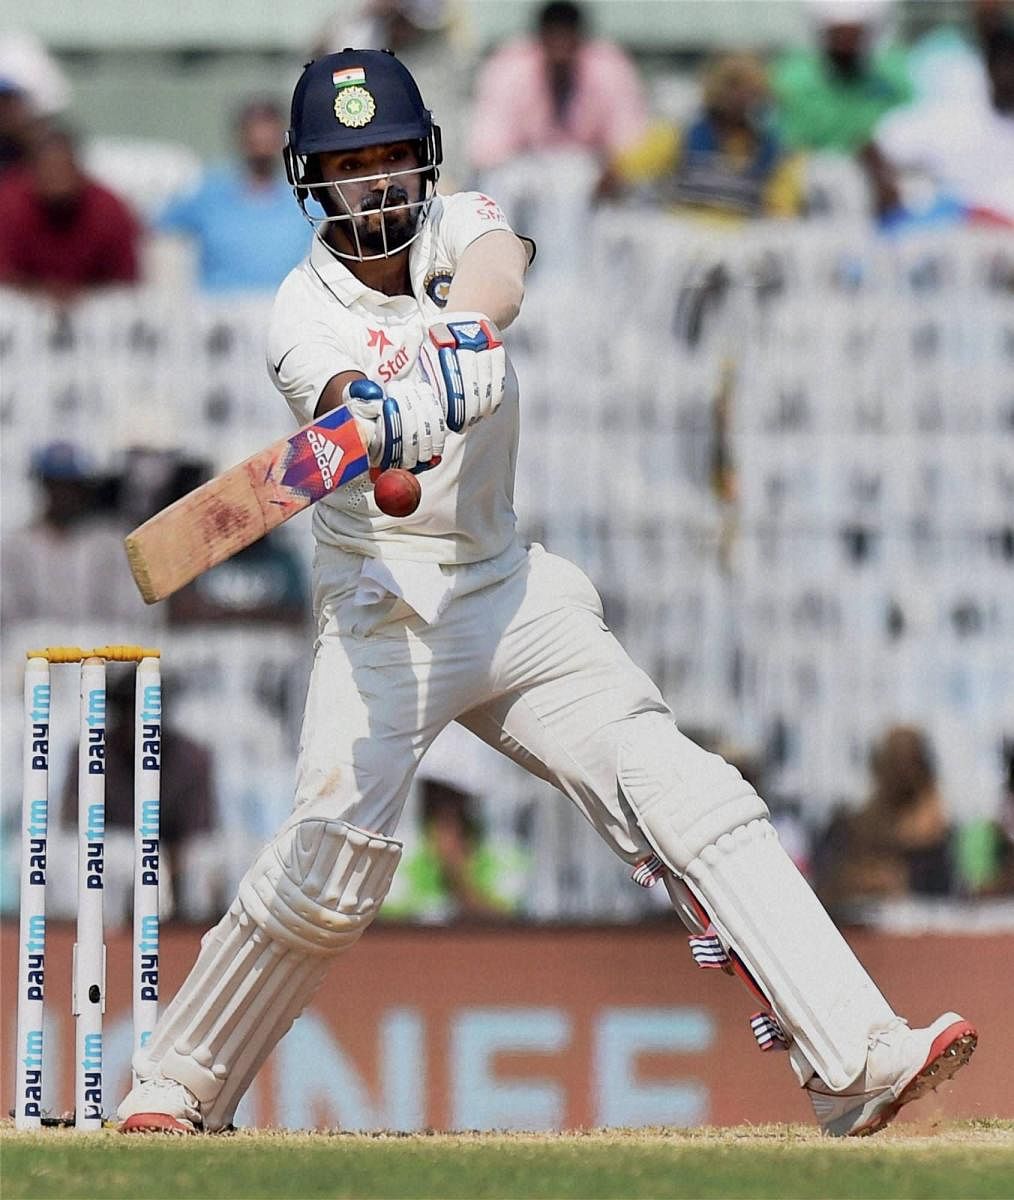 India's KL Rahul scored a fine 58 in the practice game against Essex on Wednesday. FILE PHOTO